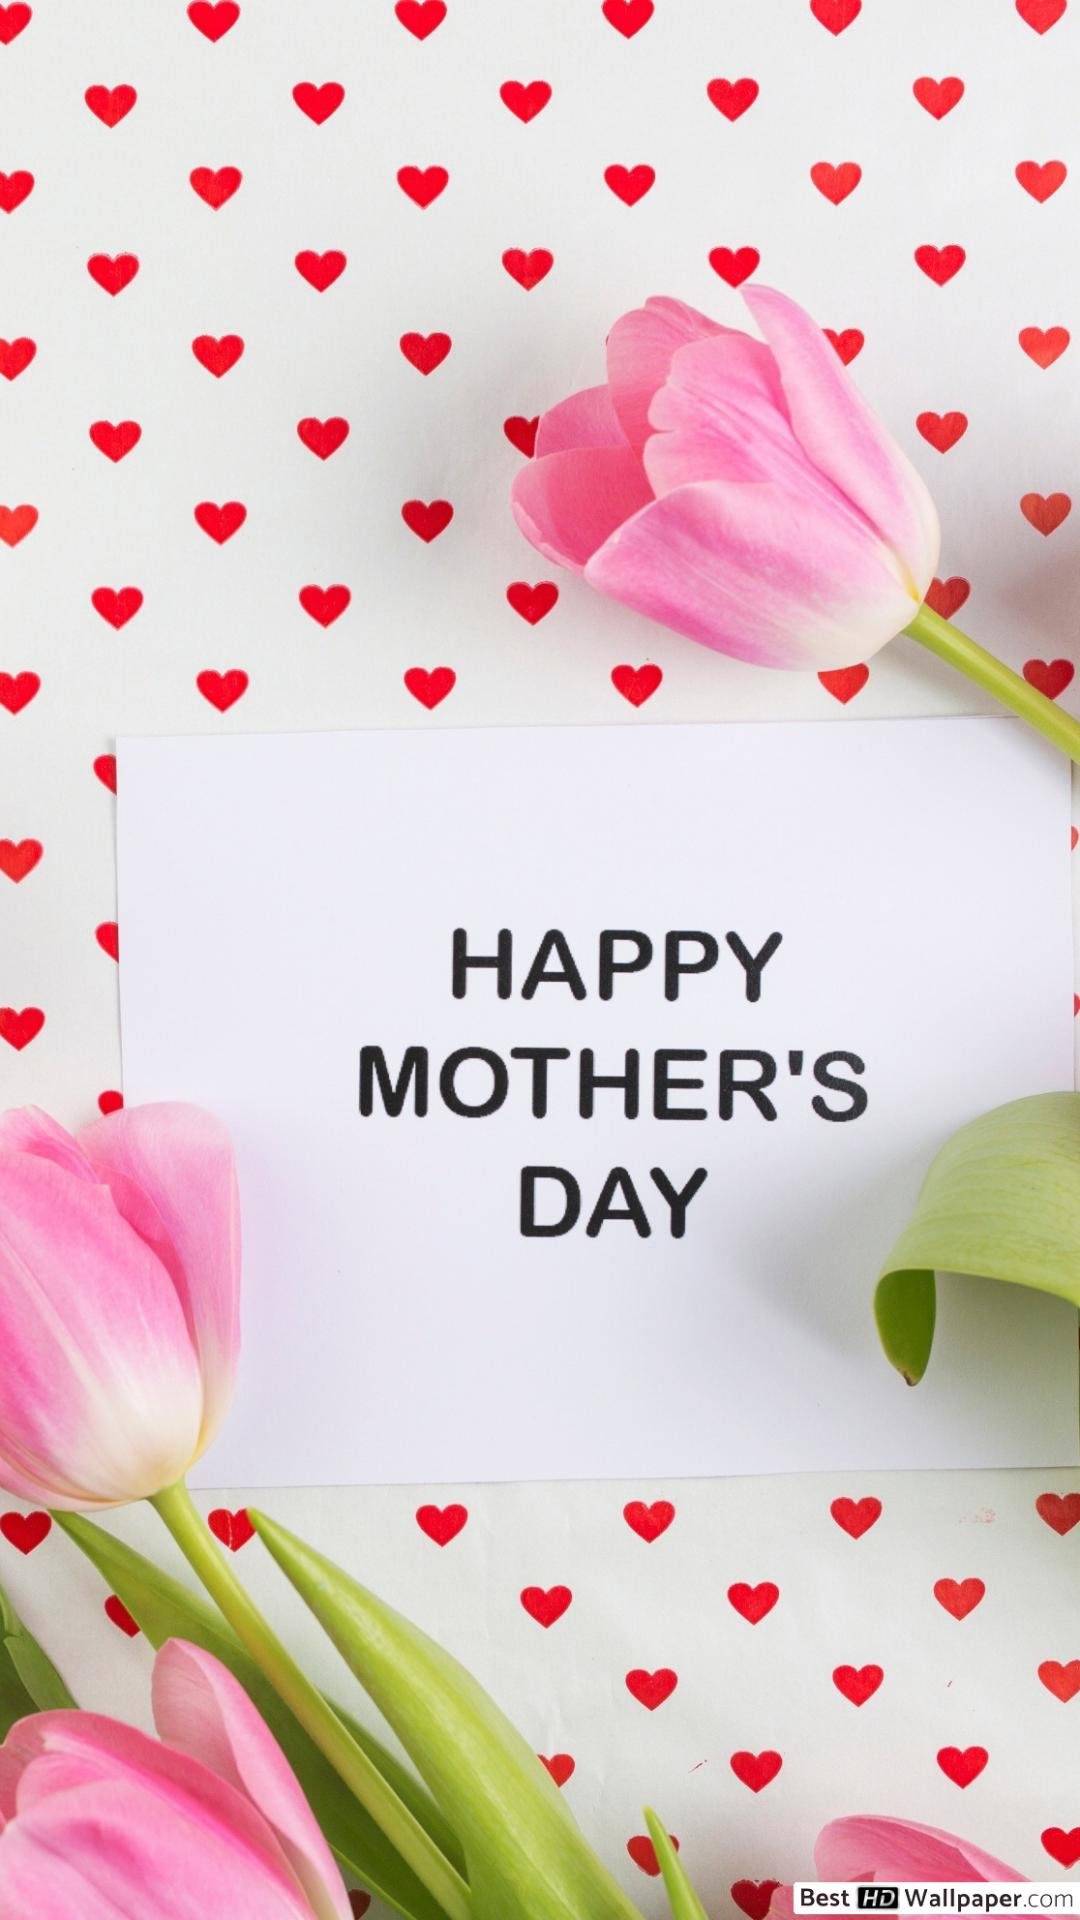 MothersDayWallpapersBackgrounds1  Happy mothers day wallpaper Mothers  day images Happy mothers day images